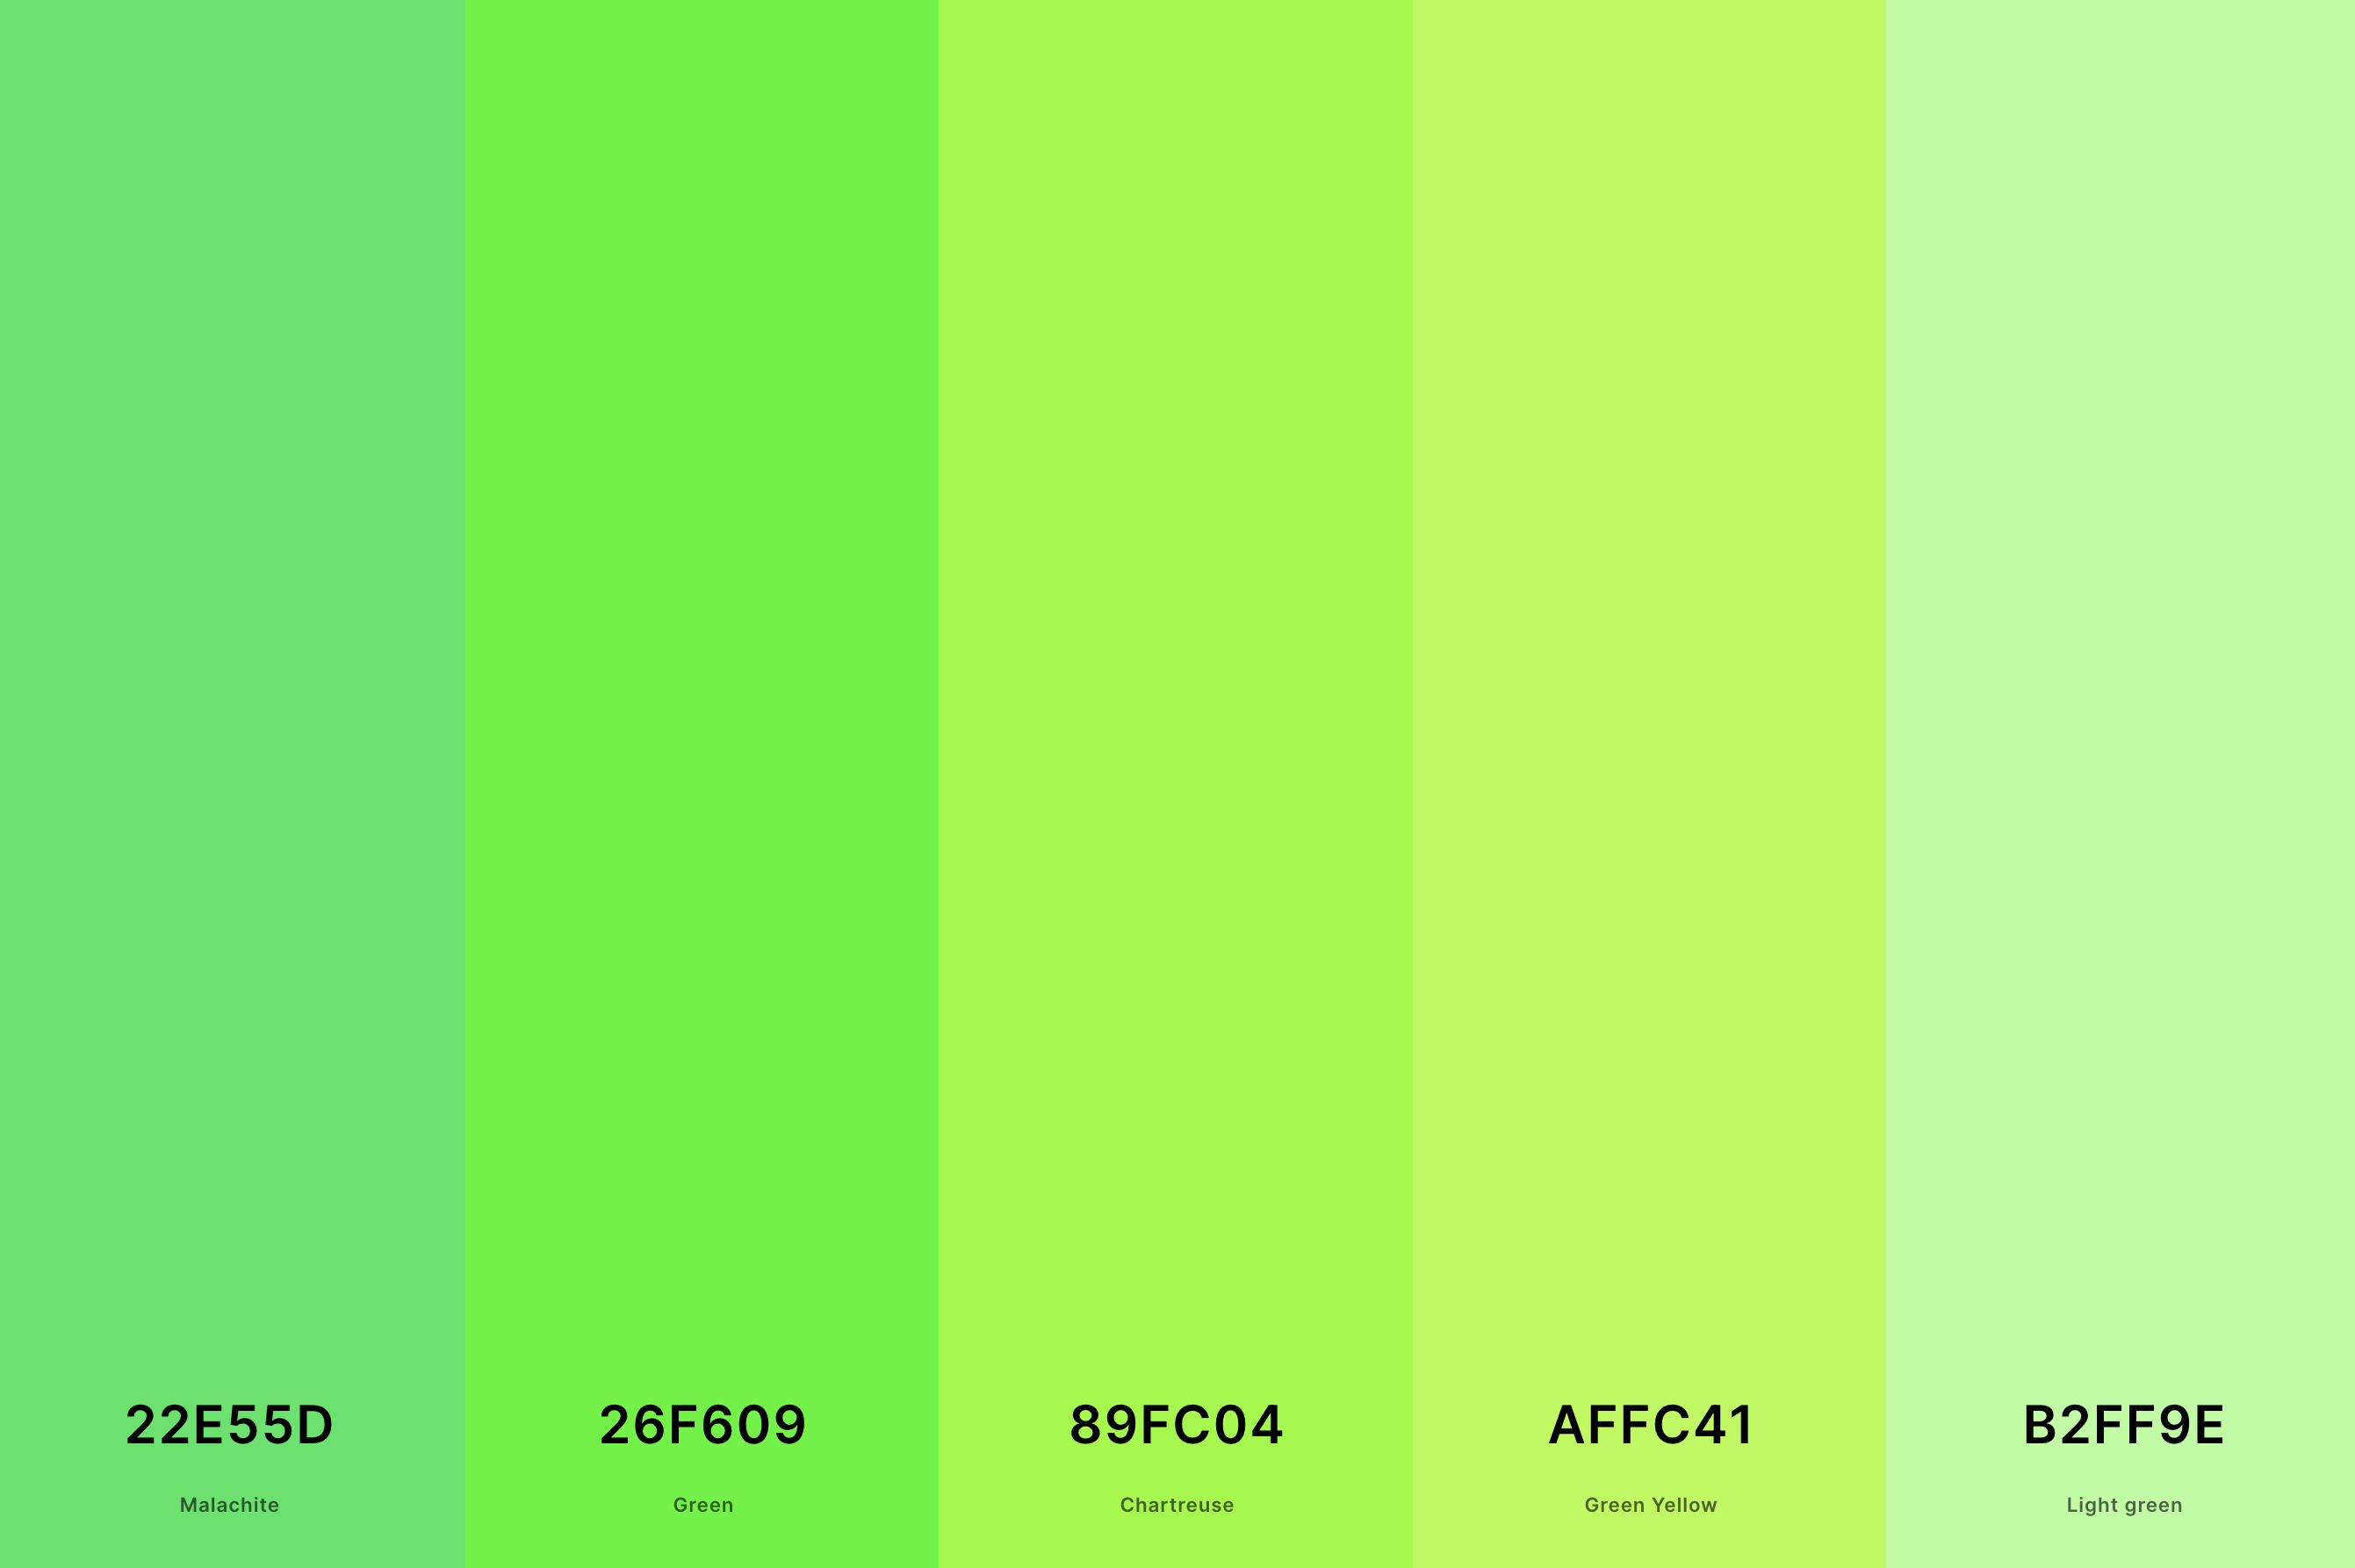 2. Green And Yellow Color Palette Color Palette with Malachite (Hex #22E55D) + Green (Hex #26F609) + Chartreuse (Hex #89FC04) + Green Yellow (Hex #AFFC41) + Light Green (Hex #B2FF9E) Color Palette with Hex Codes